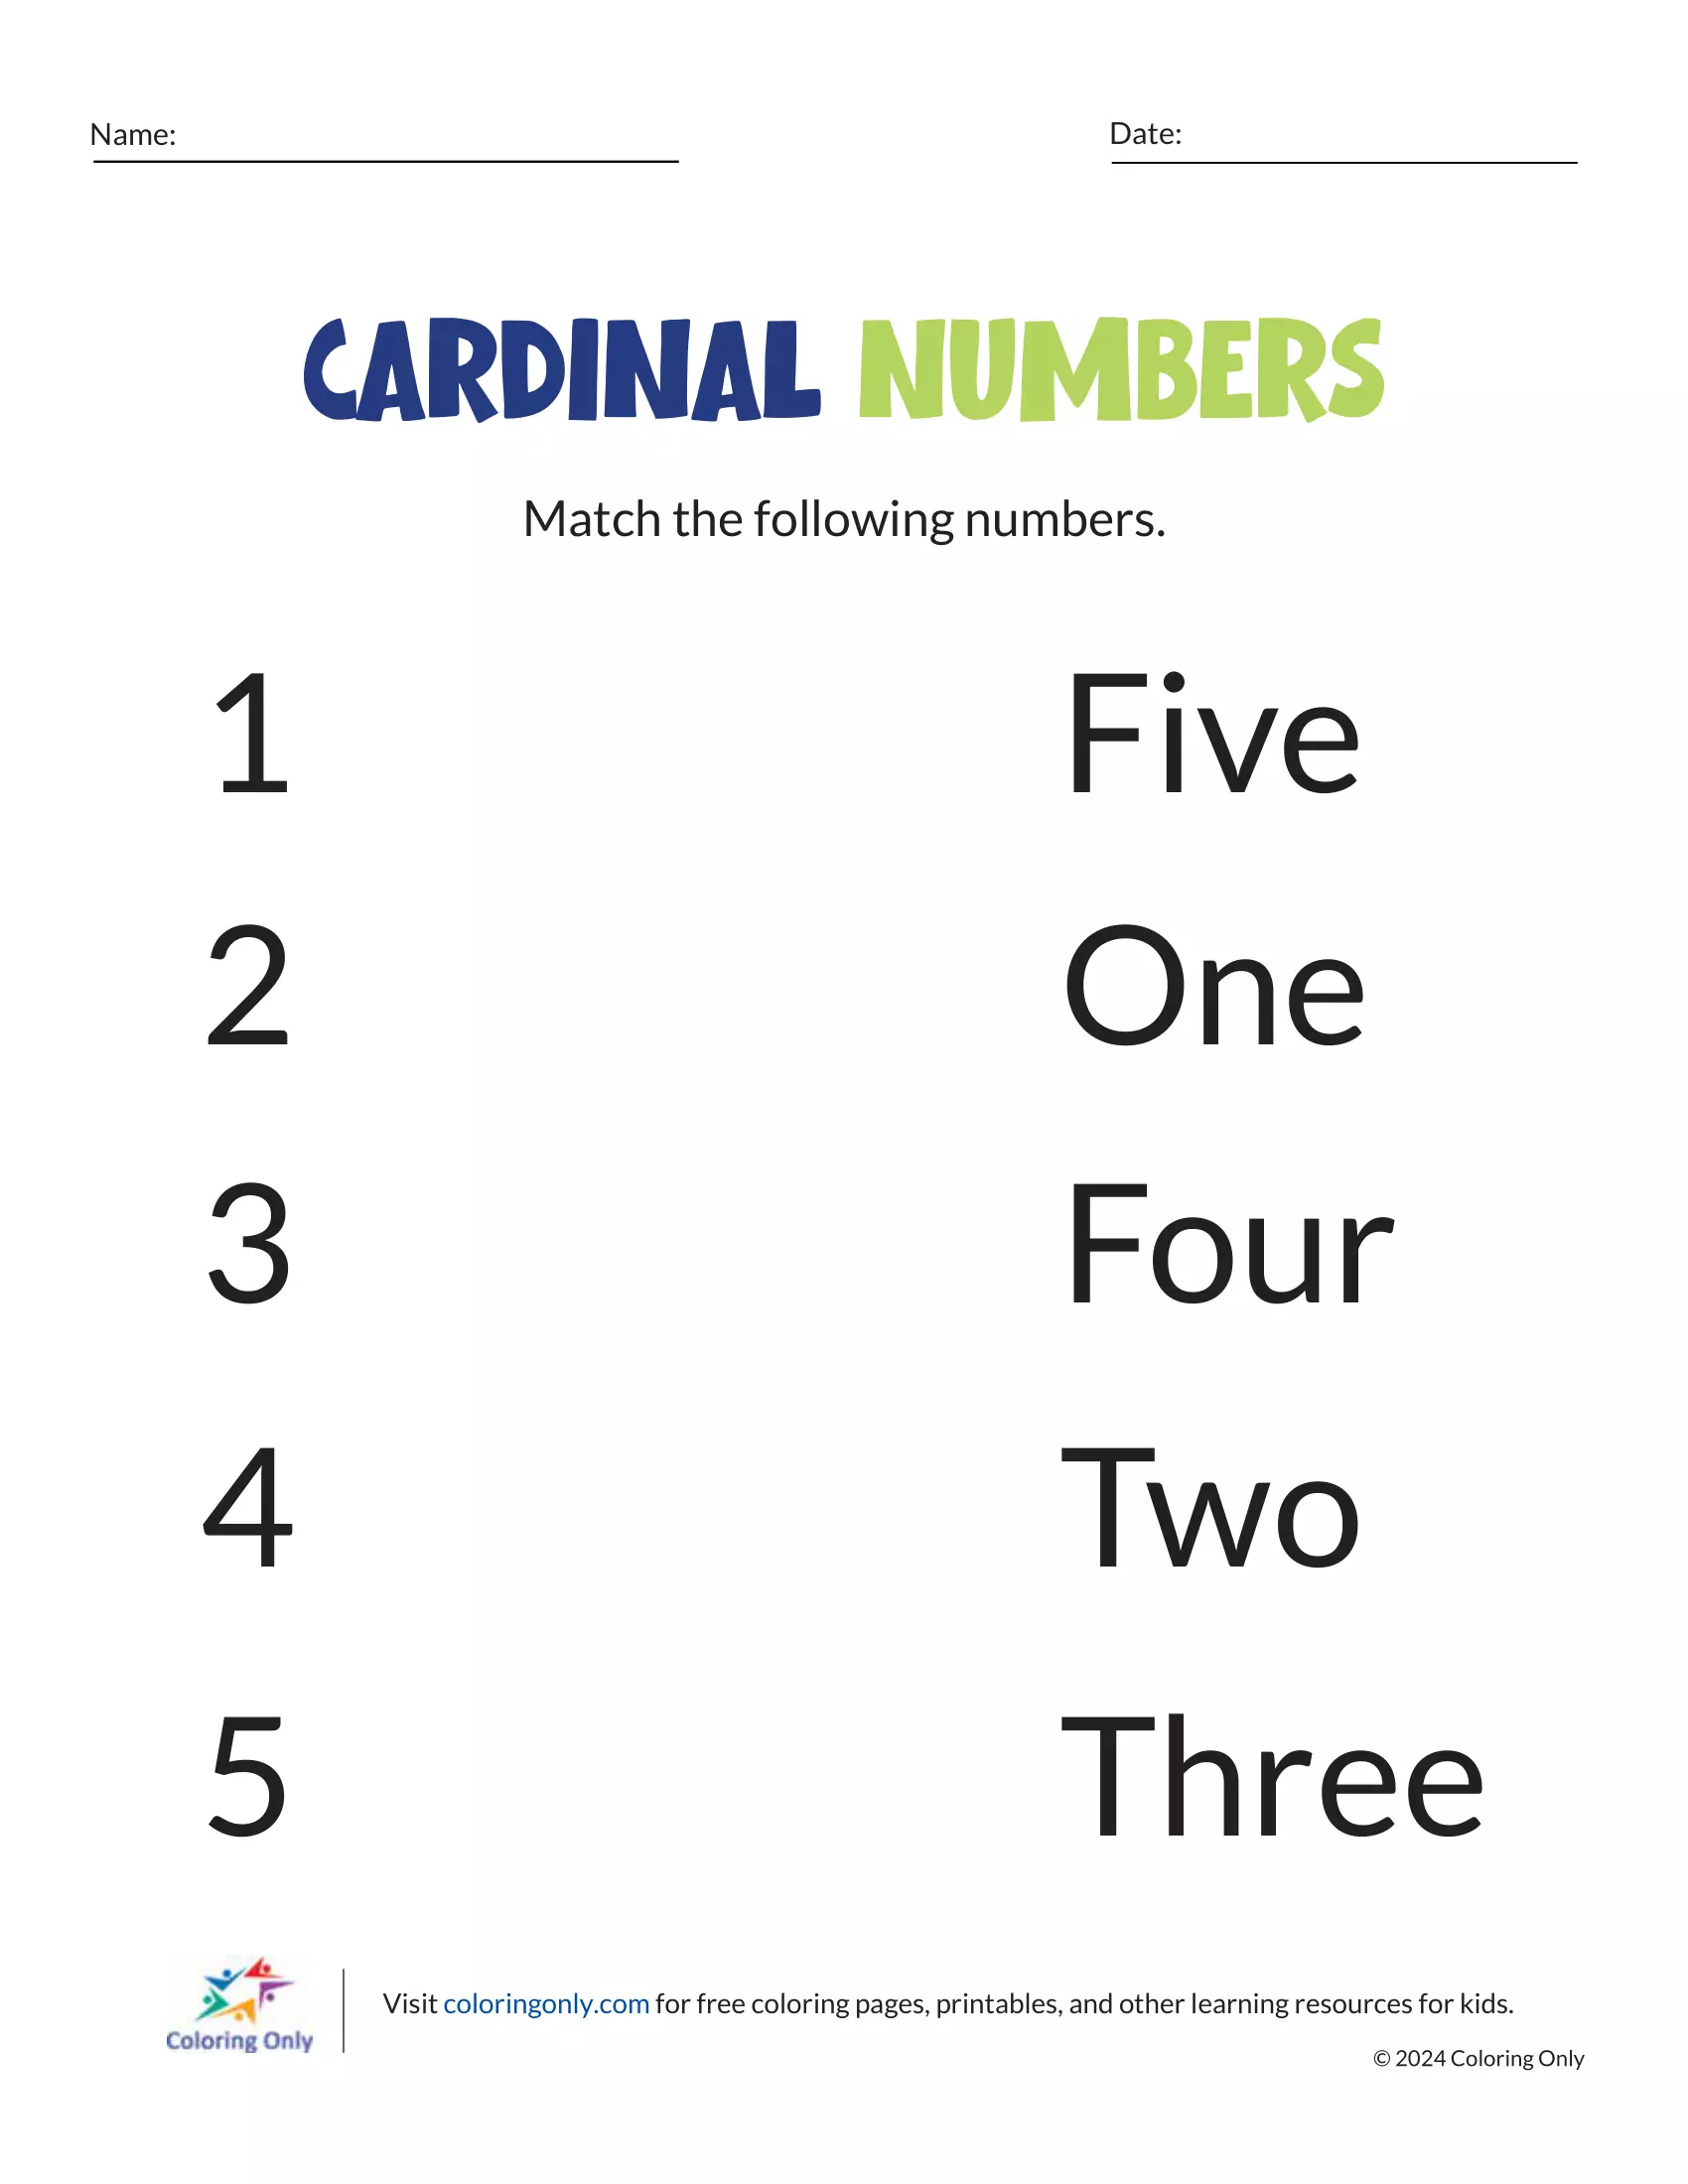 Engage young minds with "CARDINAL NUMBERS," a free printable worksheet to help preschoolers learn number matching. Visit coloringonly.com for more educational fun!